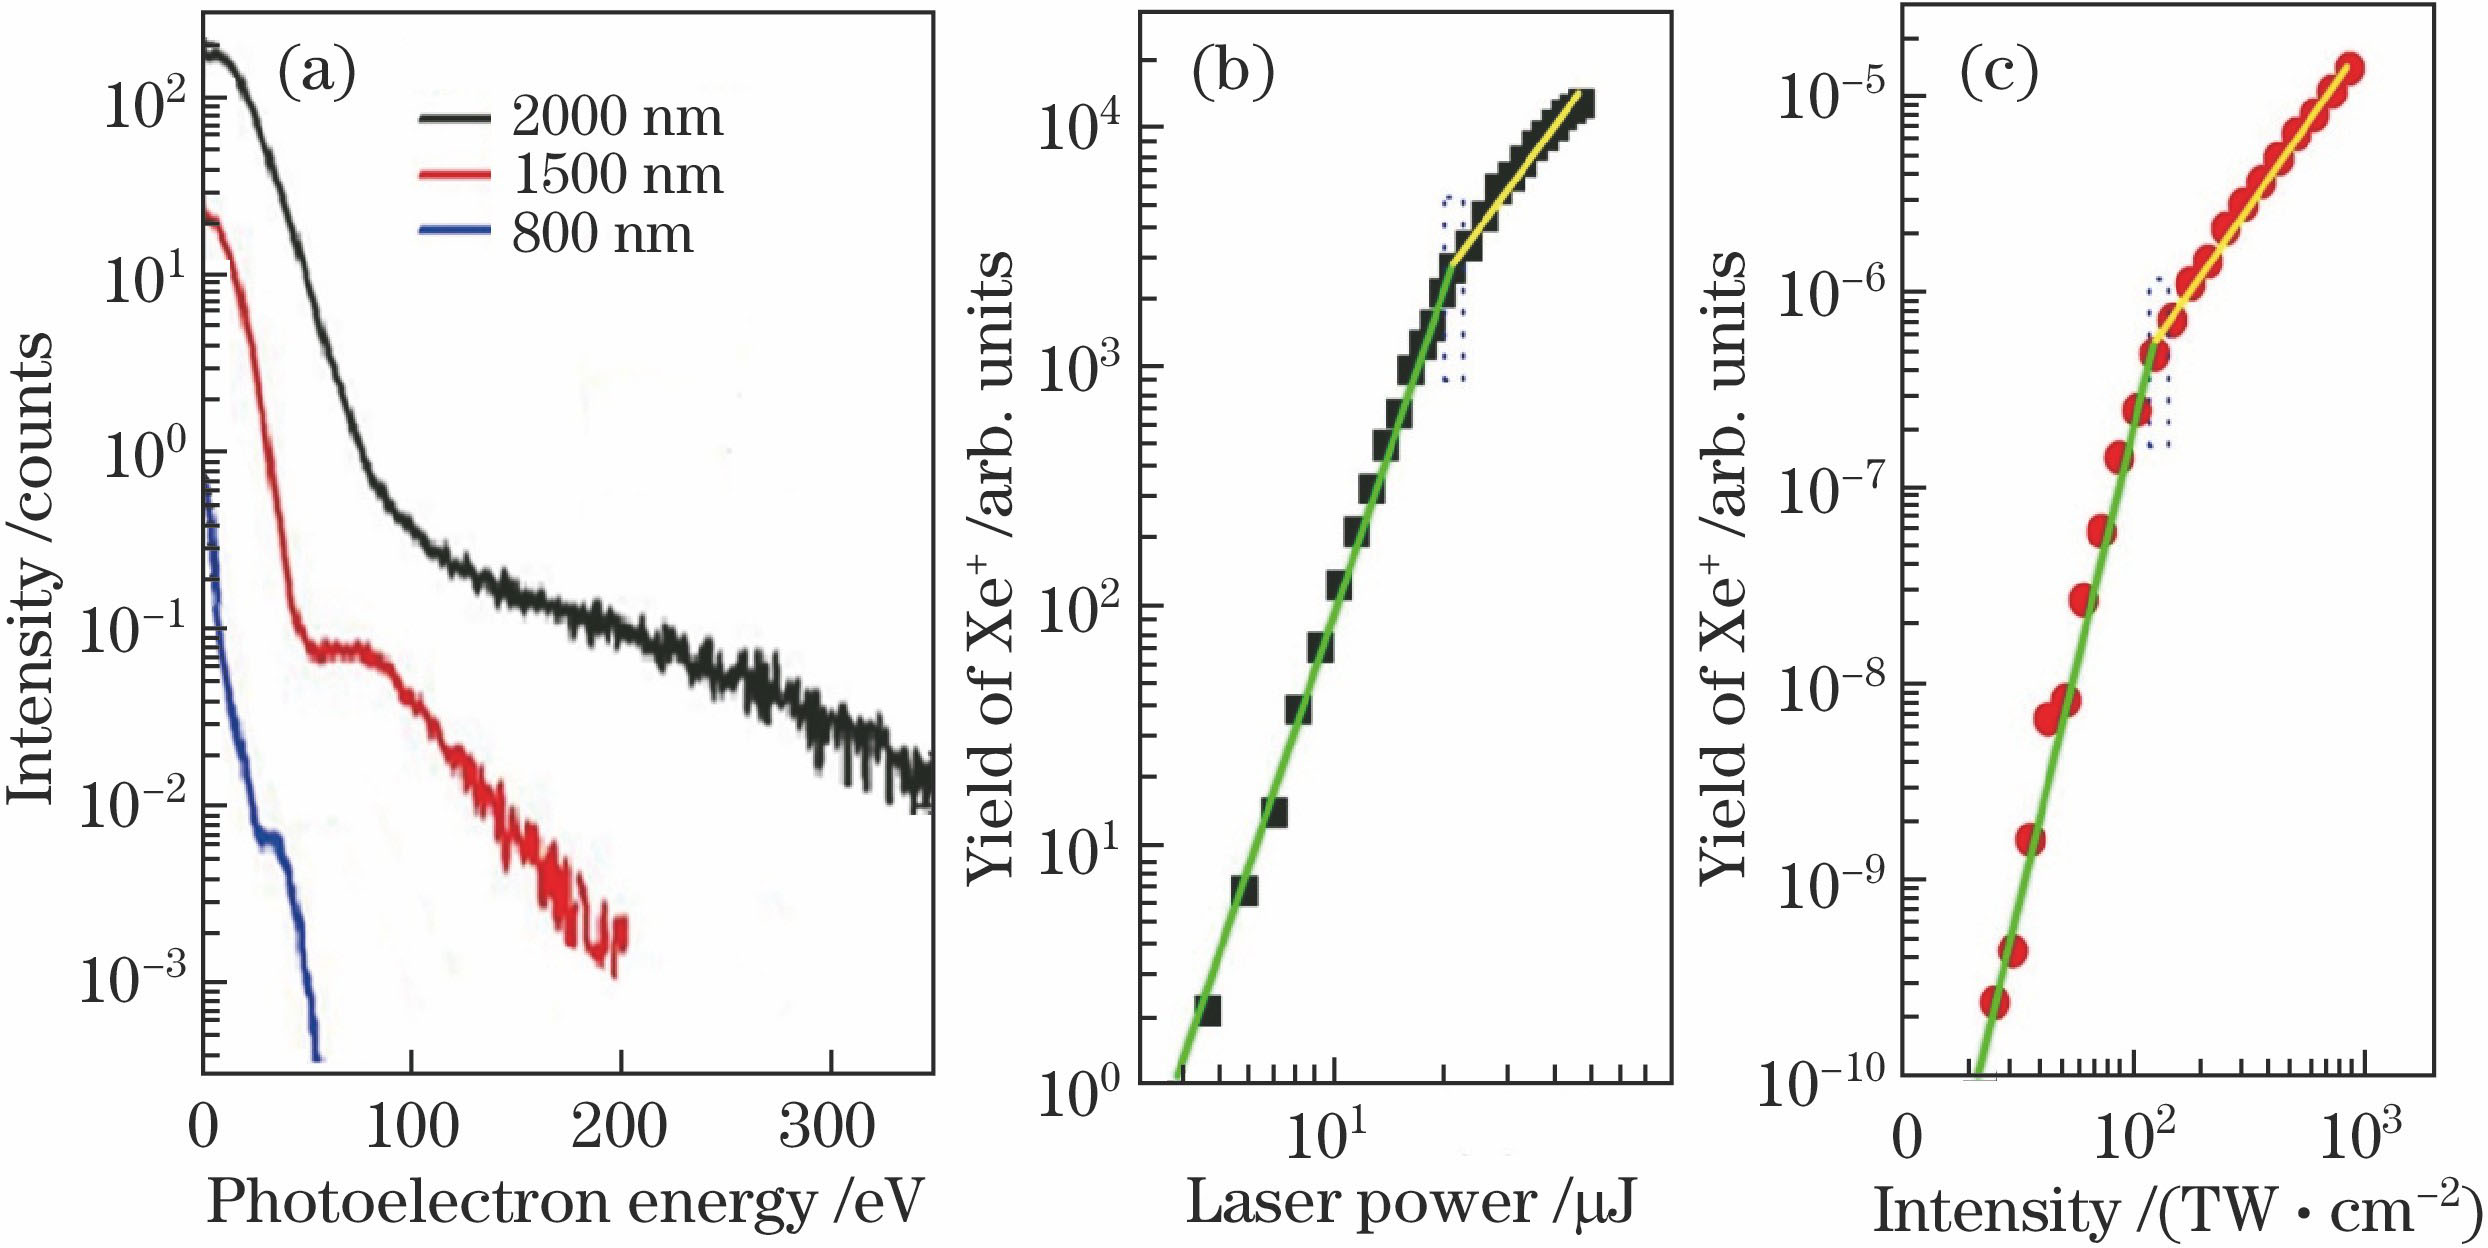 (a) Ionization photoelectron spectra of xenon atom measured under different wavelengths by experiment; (b) yield of Xe+ versus laser power at wavelength of 800 nm by experiment; (c) yield of Xe+ versus laser intensity at wavelength of 800 nm based on PPT theory